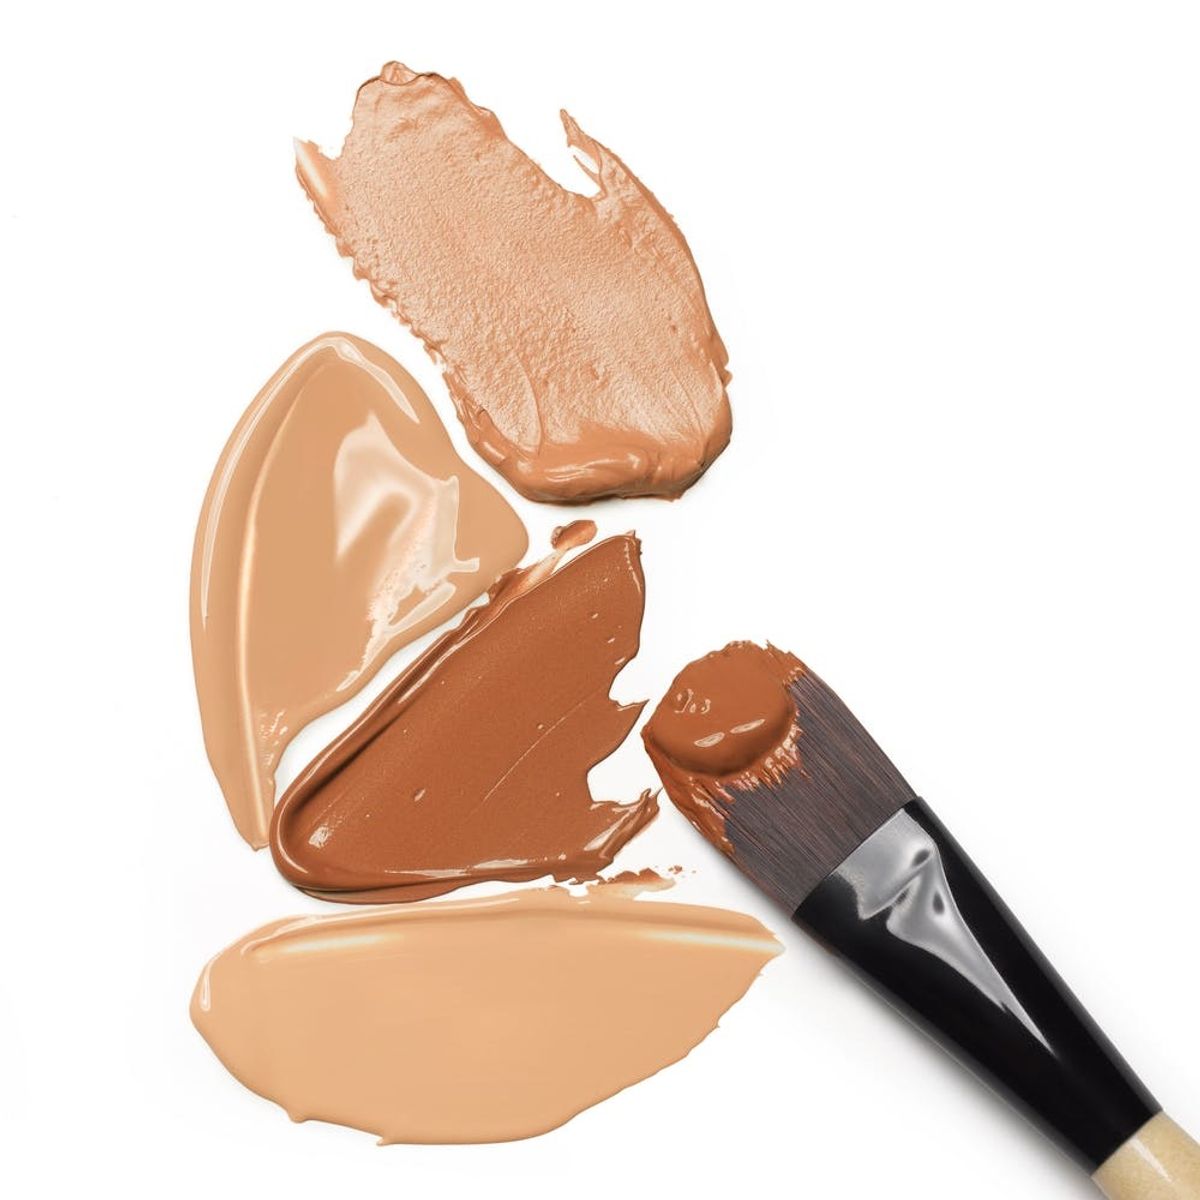 How to Find the Perfect Makeup Match for Medium Skin Tones